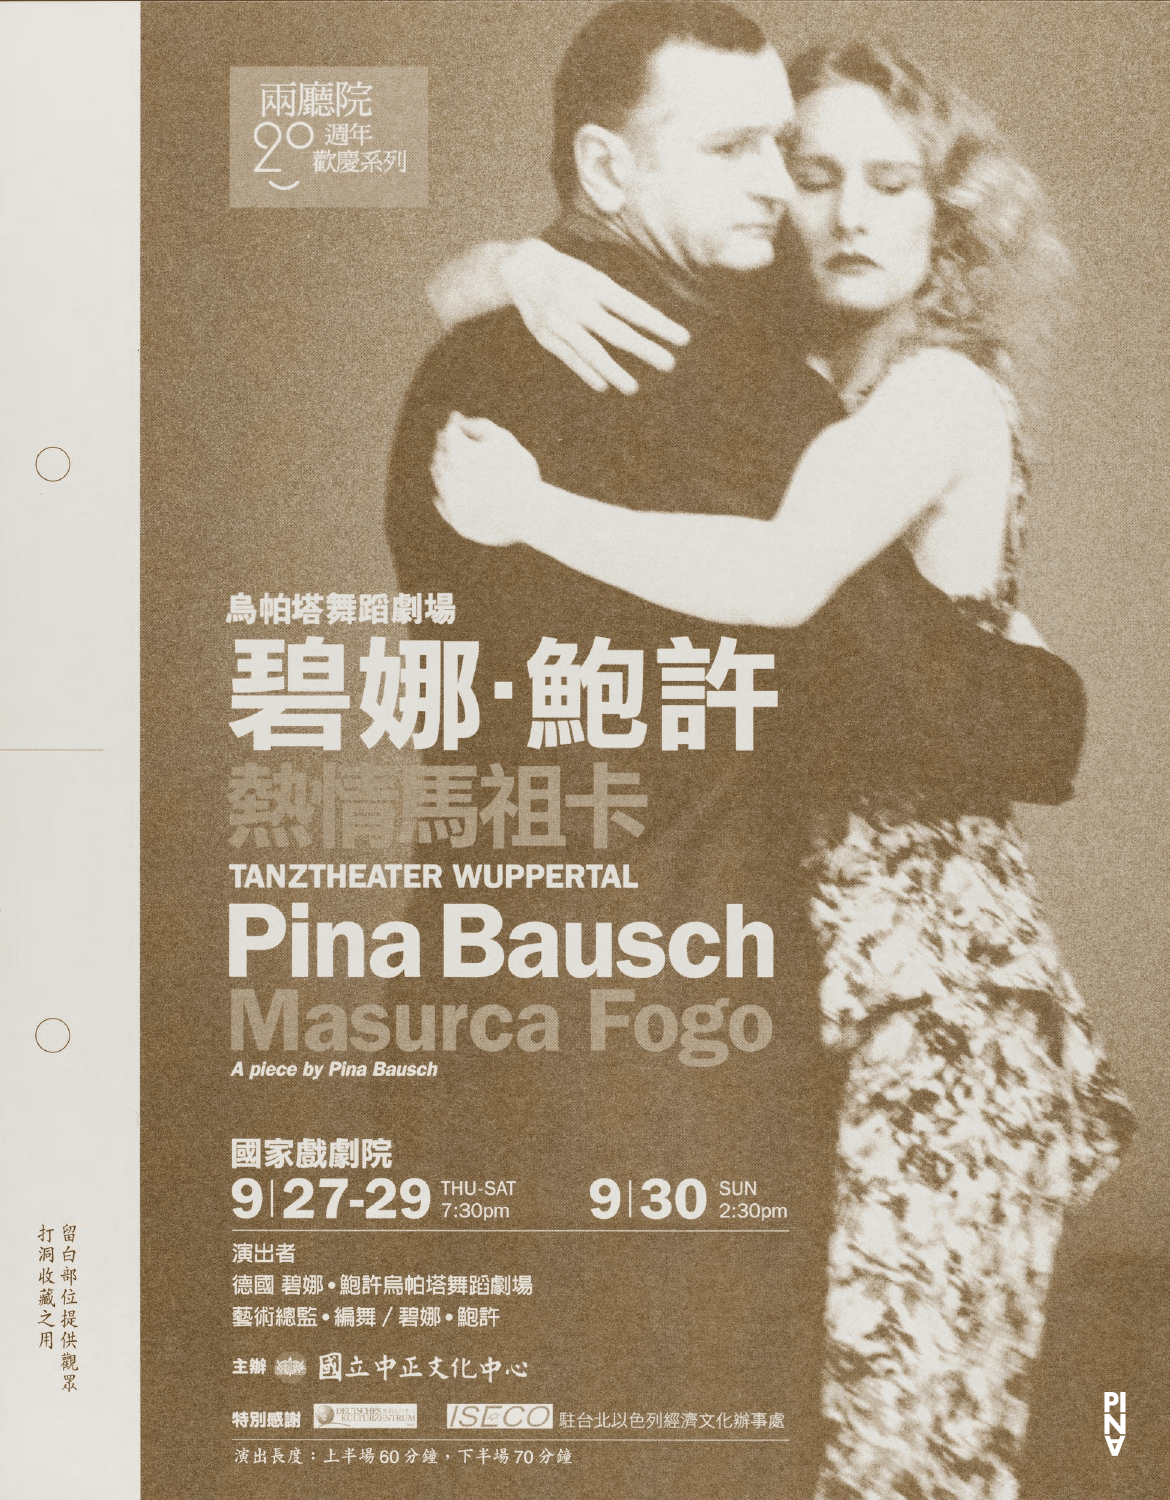 Booklet for “Masurca Fogo” by Pina Bausch with Tanztheater Wuppertal in in Taipei, 09/27/2007 – 09/30/2007